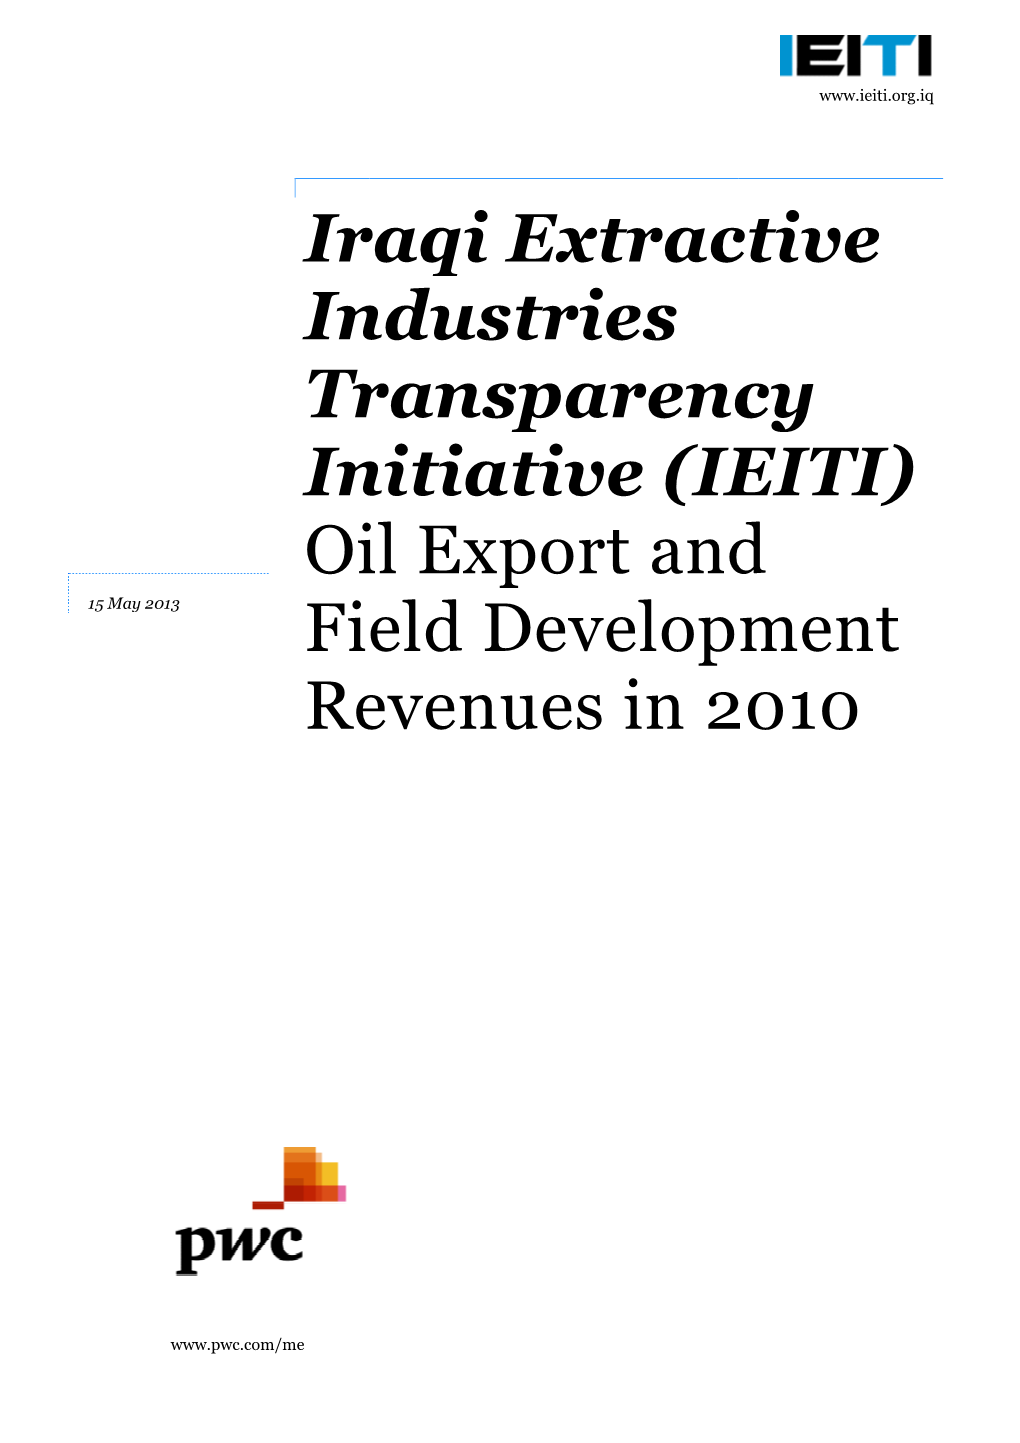 I Oil Export an Field Develop Revenues in Iraqi Extractive